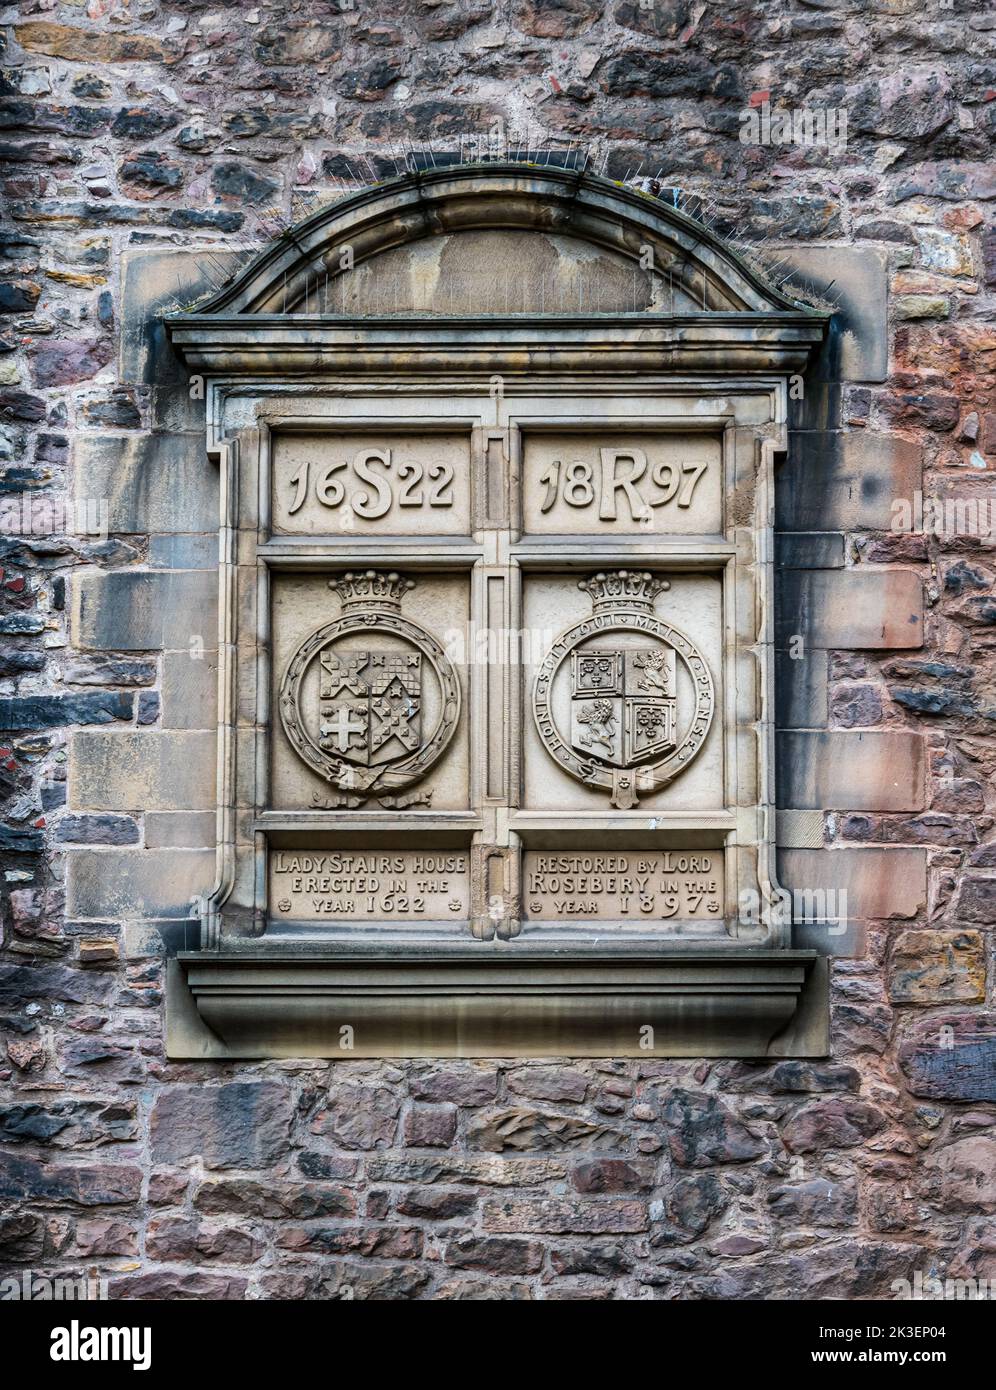 Carved dated inscription on wall with construction & restoration dates, Writer's Museum, Makar's Court, Edinburgh, Scotland, UK Stock Photo